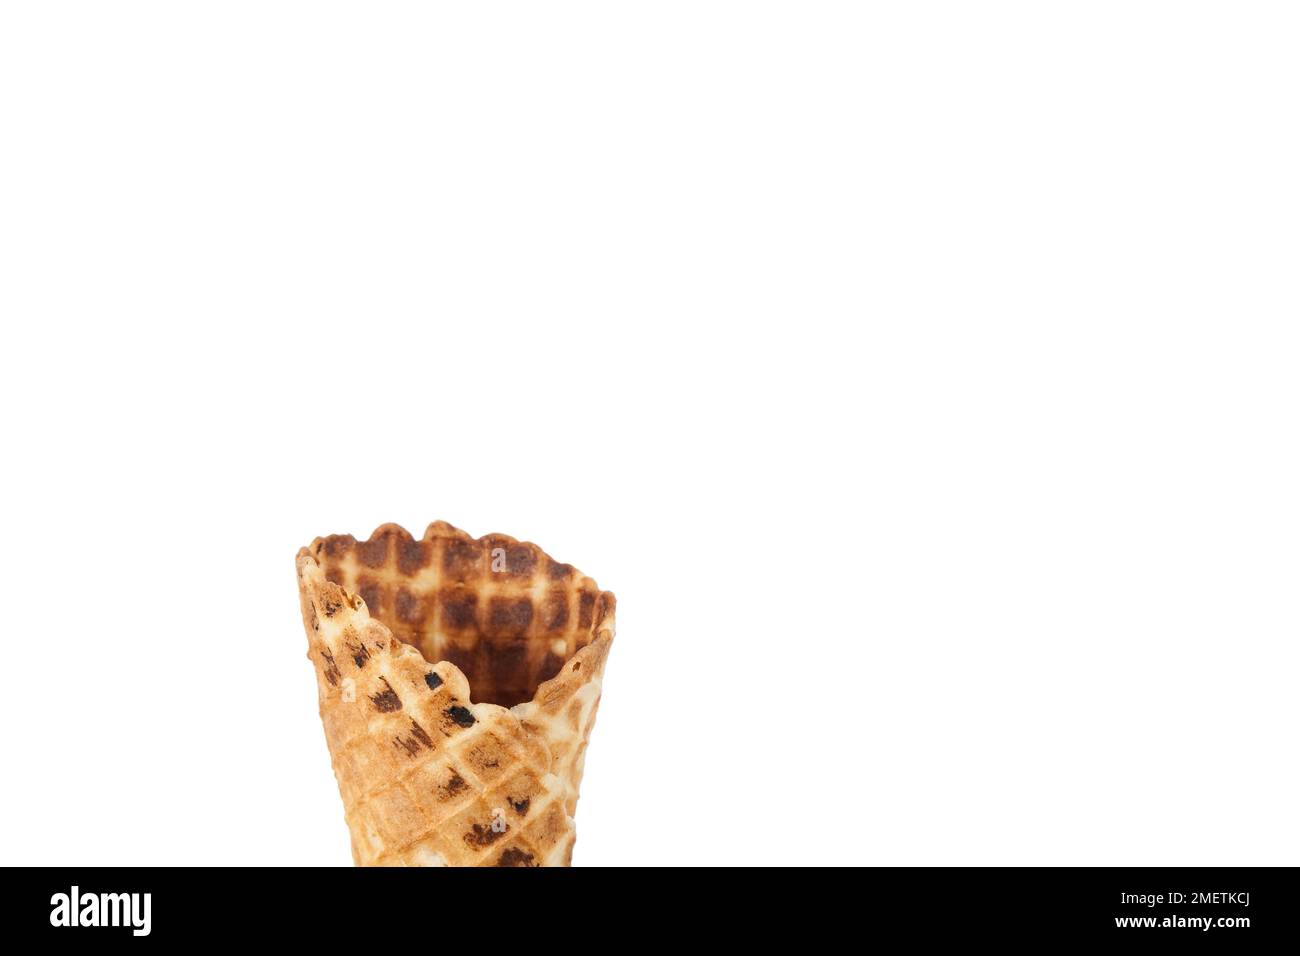 Cornet; shell for serving scoops of ice cream - photo on white background Stock Photo